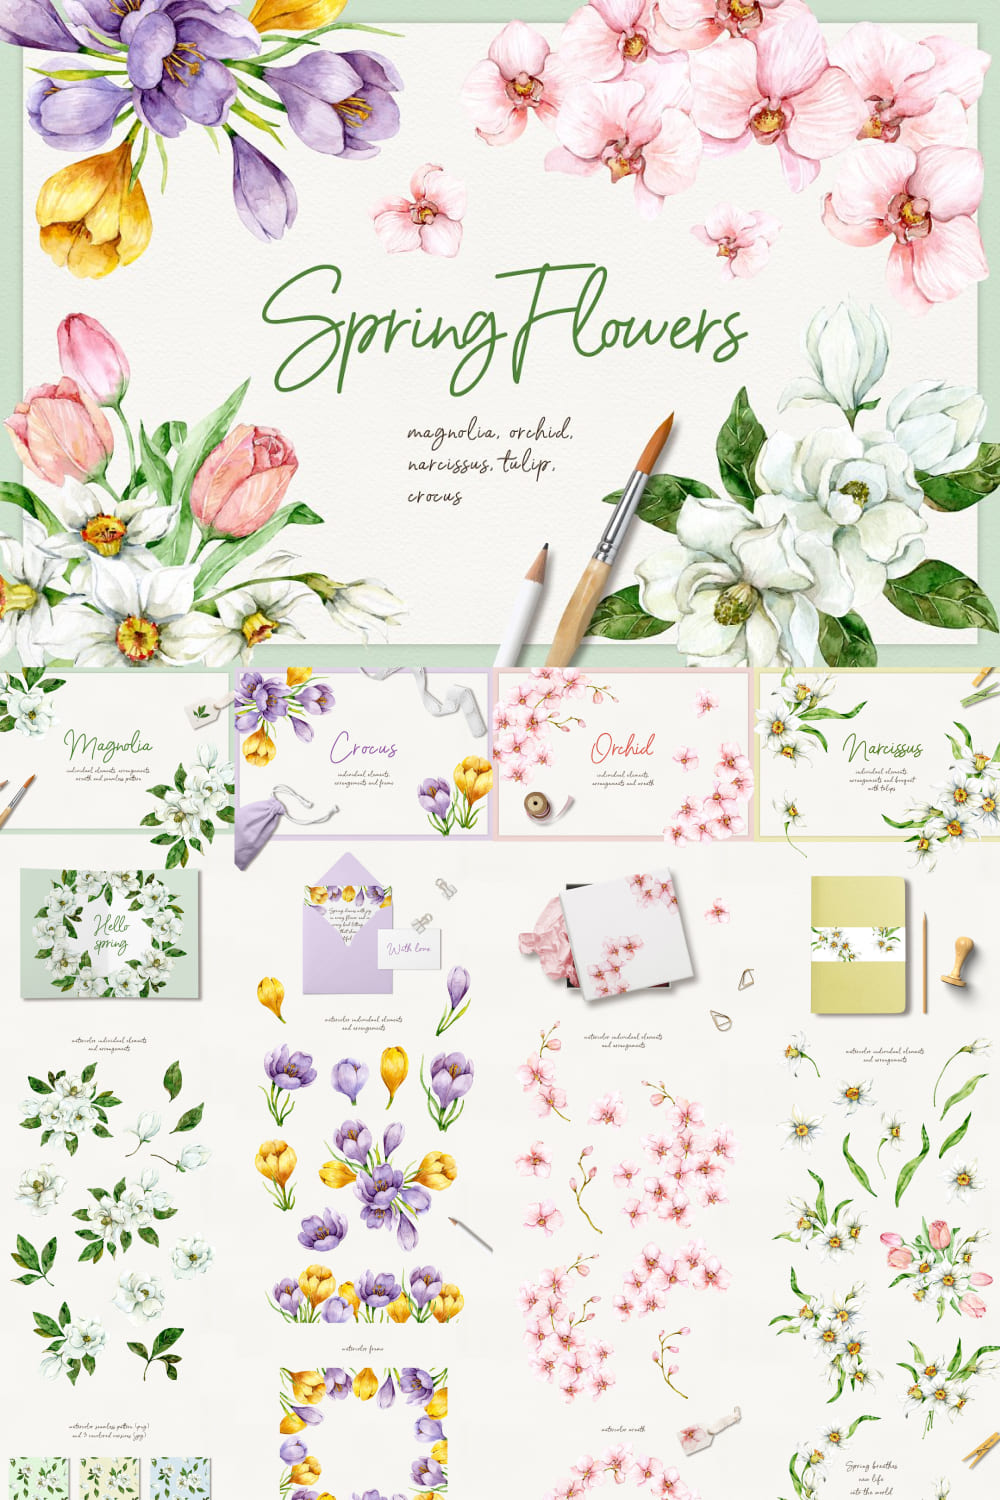 Spring Flowers - Watercolor Clipart pinterest image.